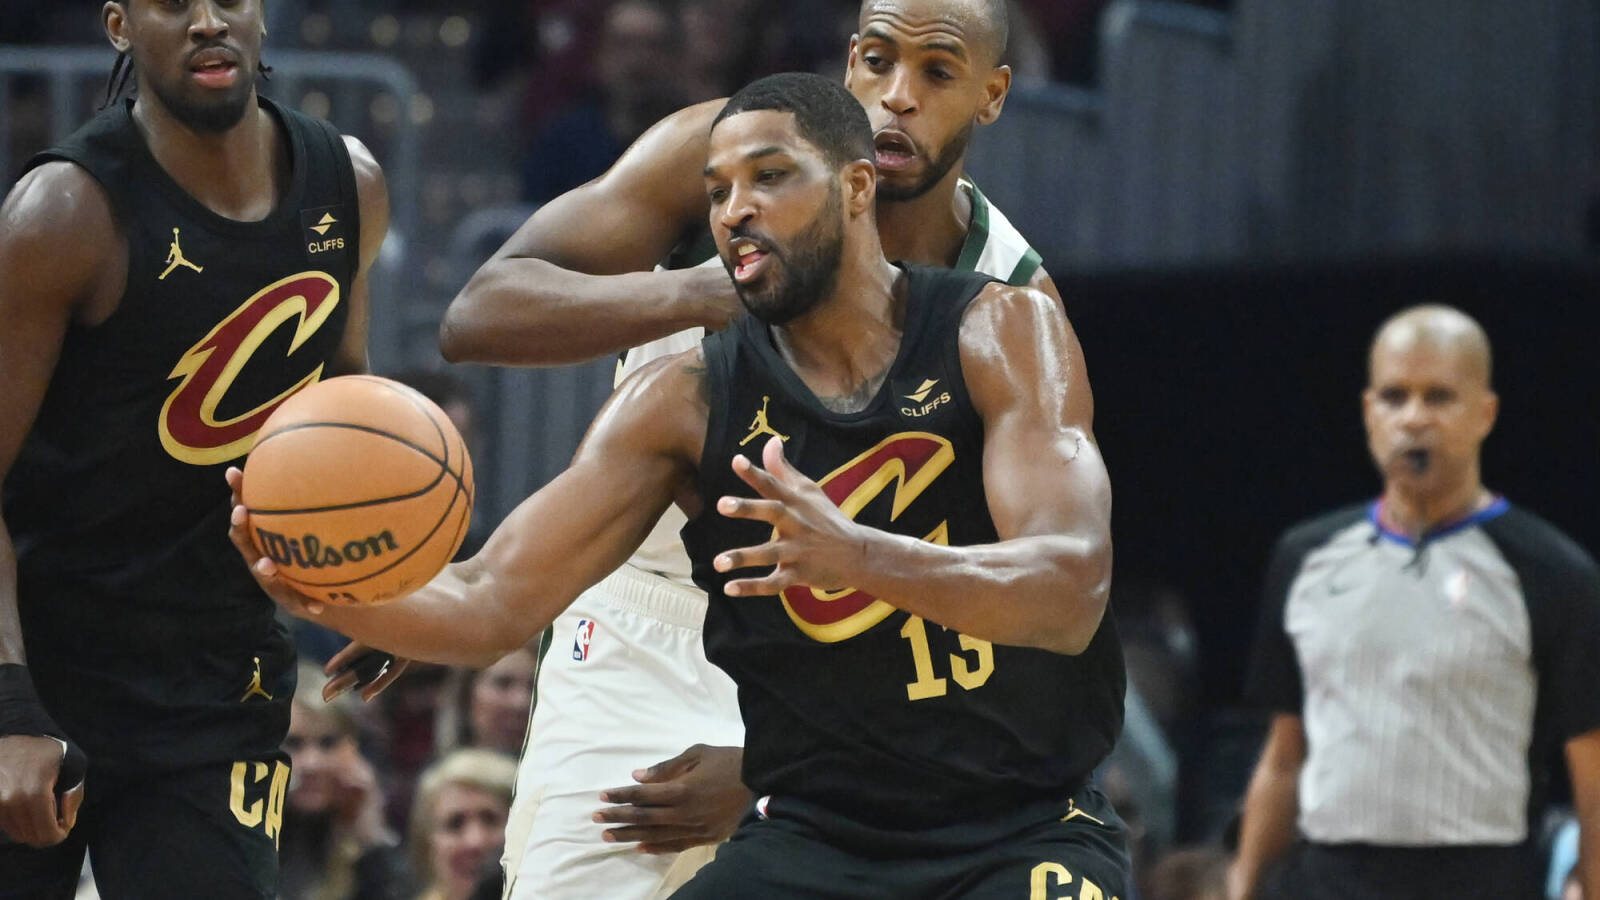 Tristan Thompson suspended for PED use